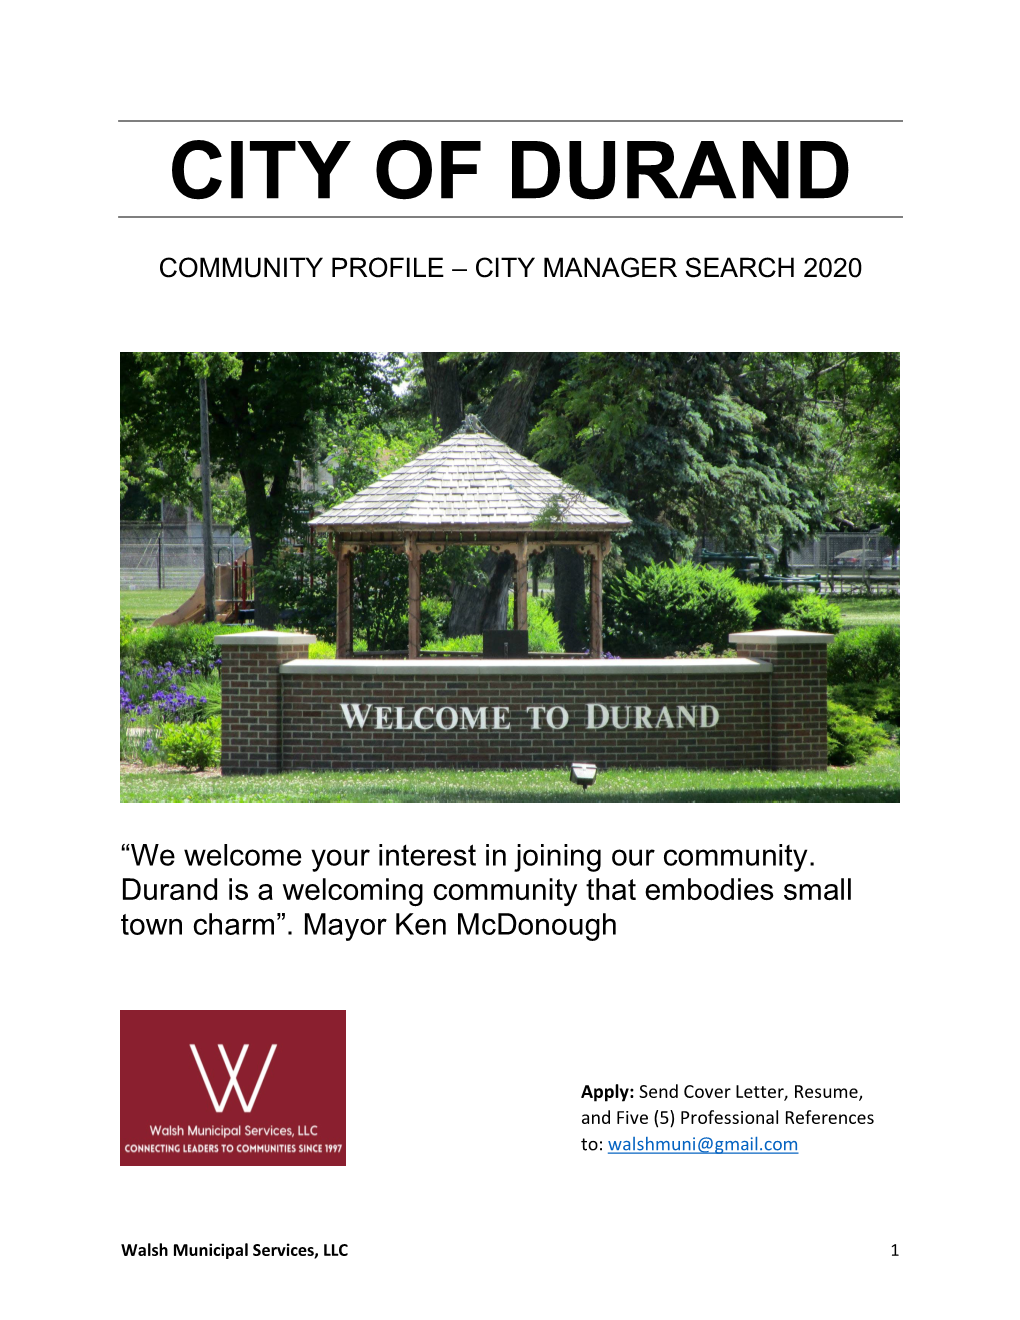 City of Durand